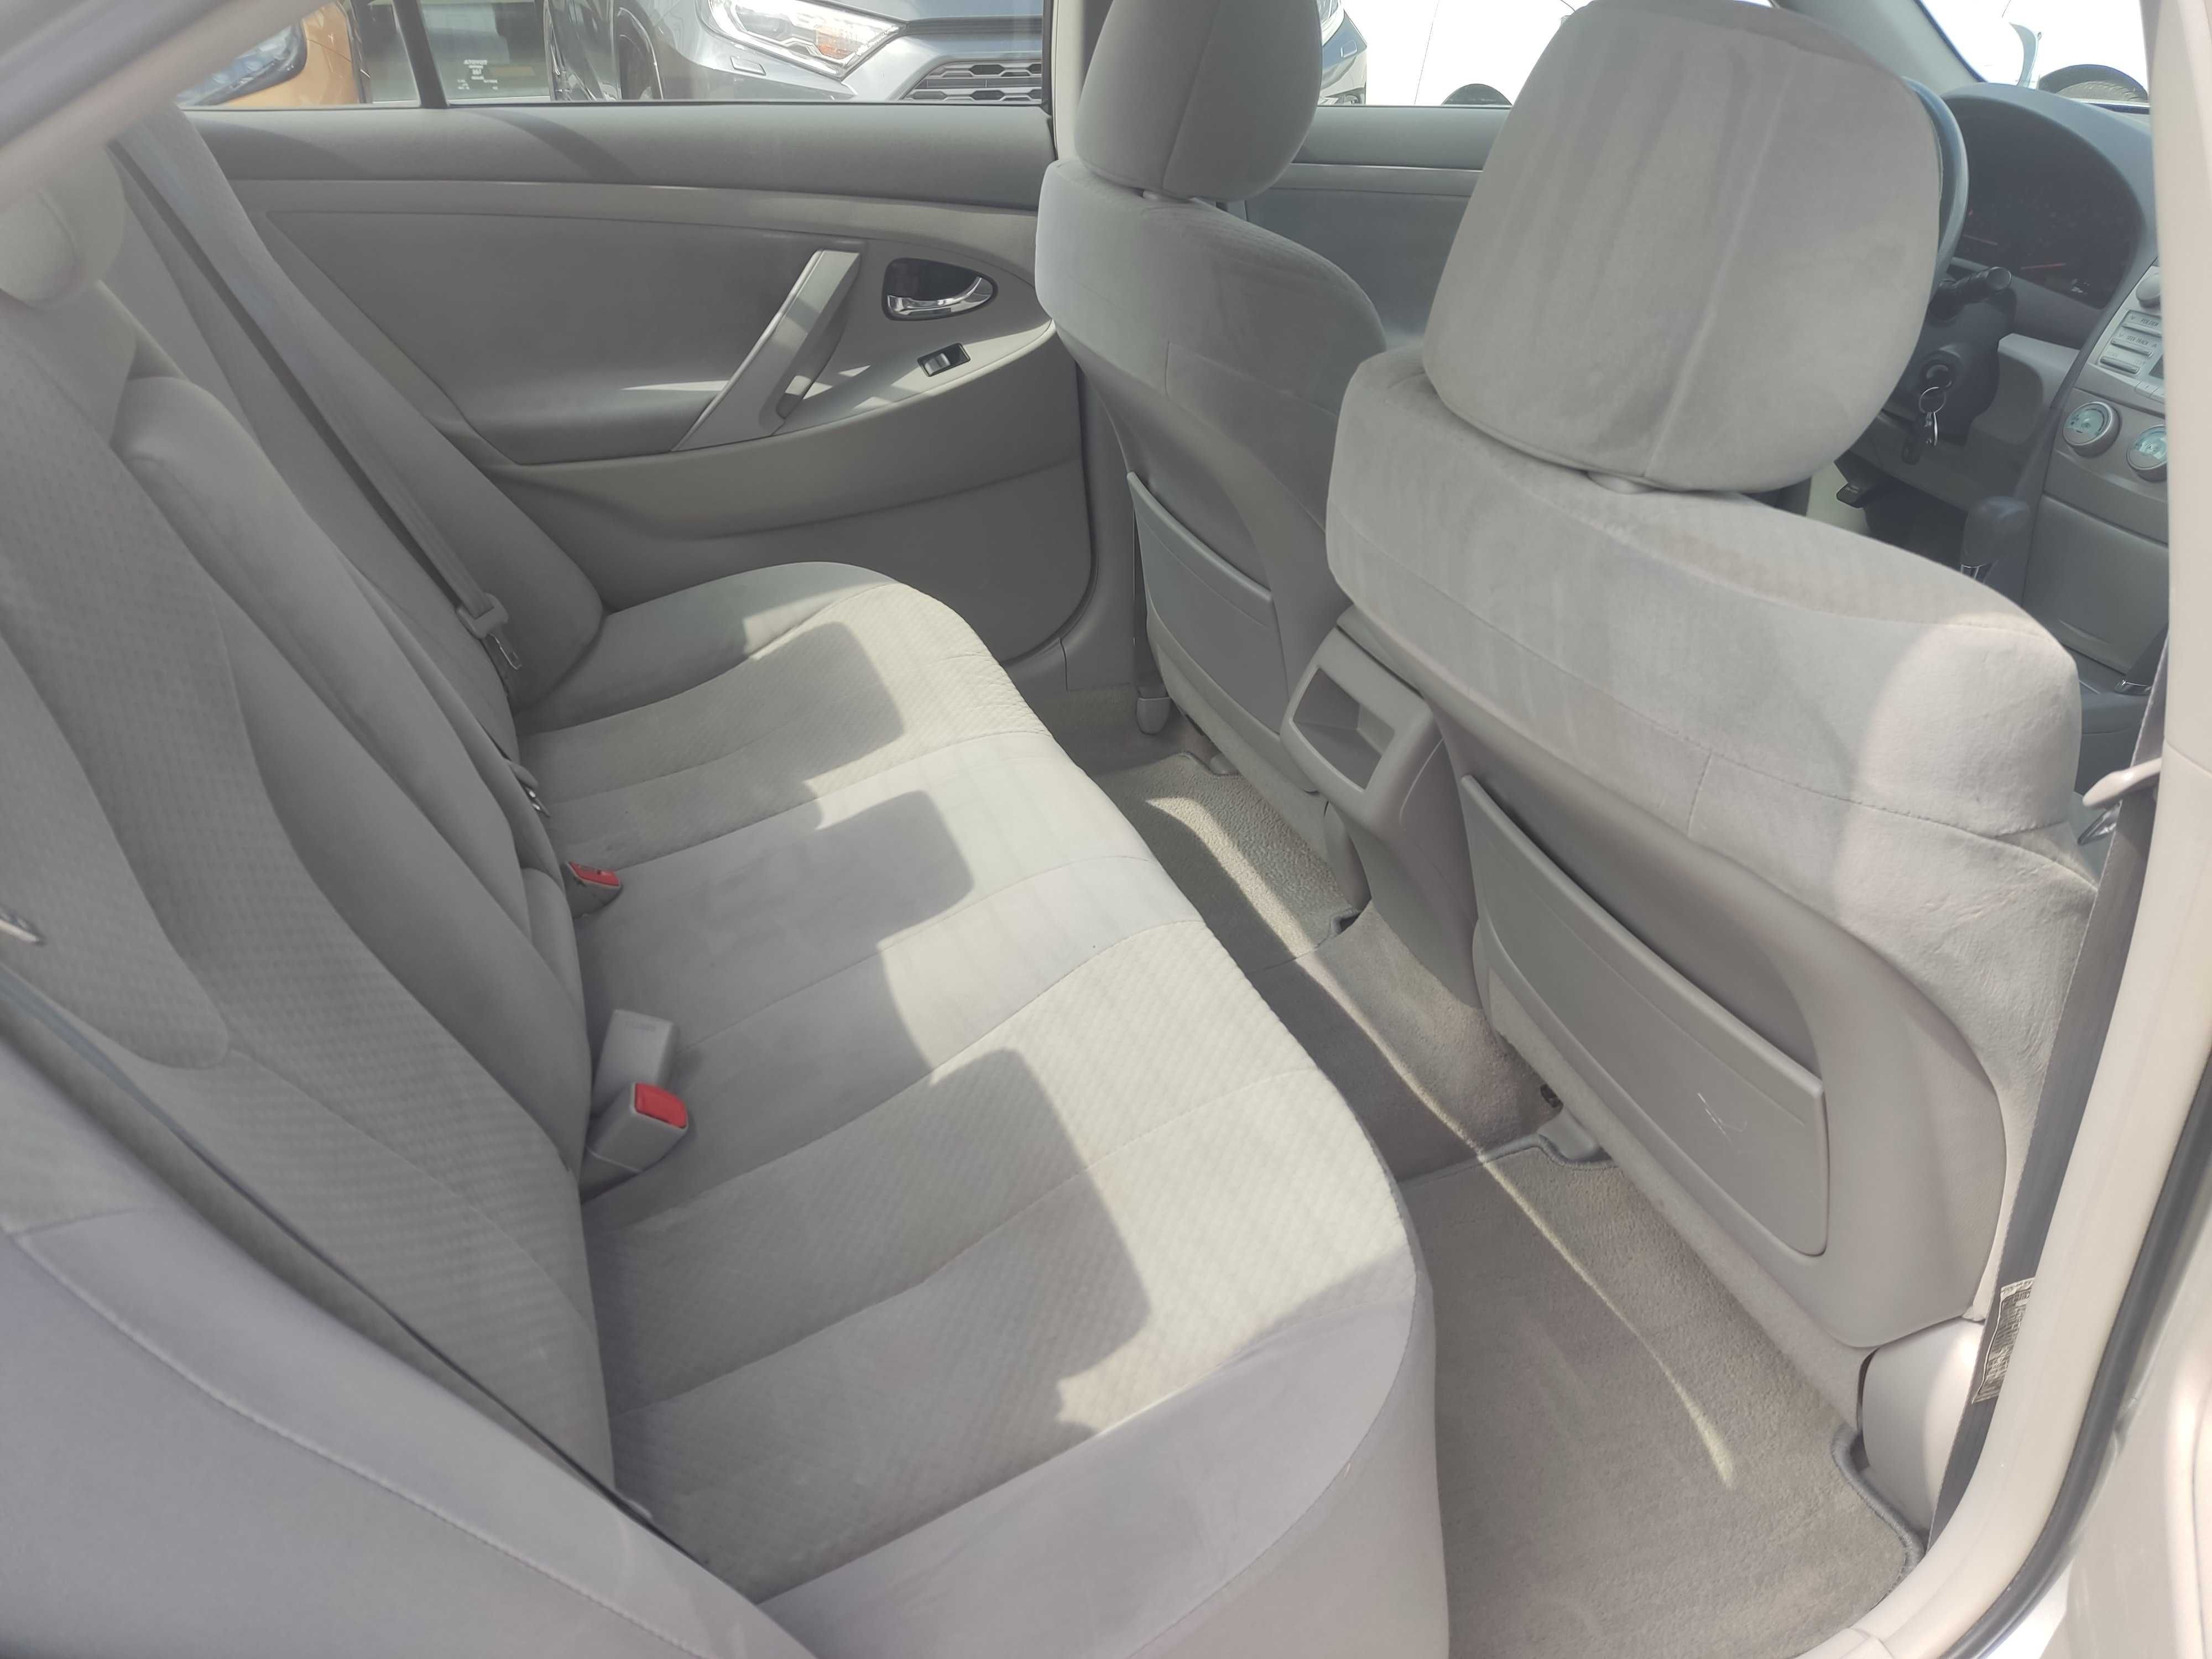 Toyota Camry 2.4 automat 2008r